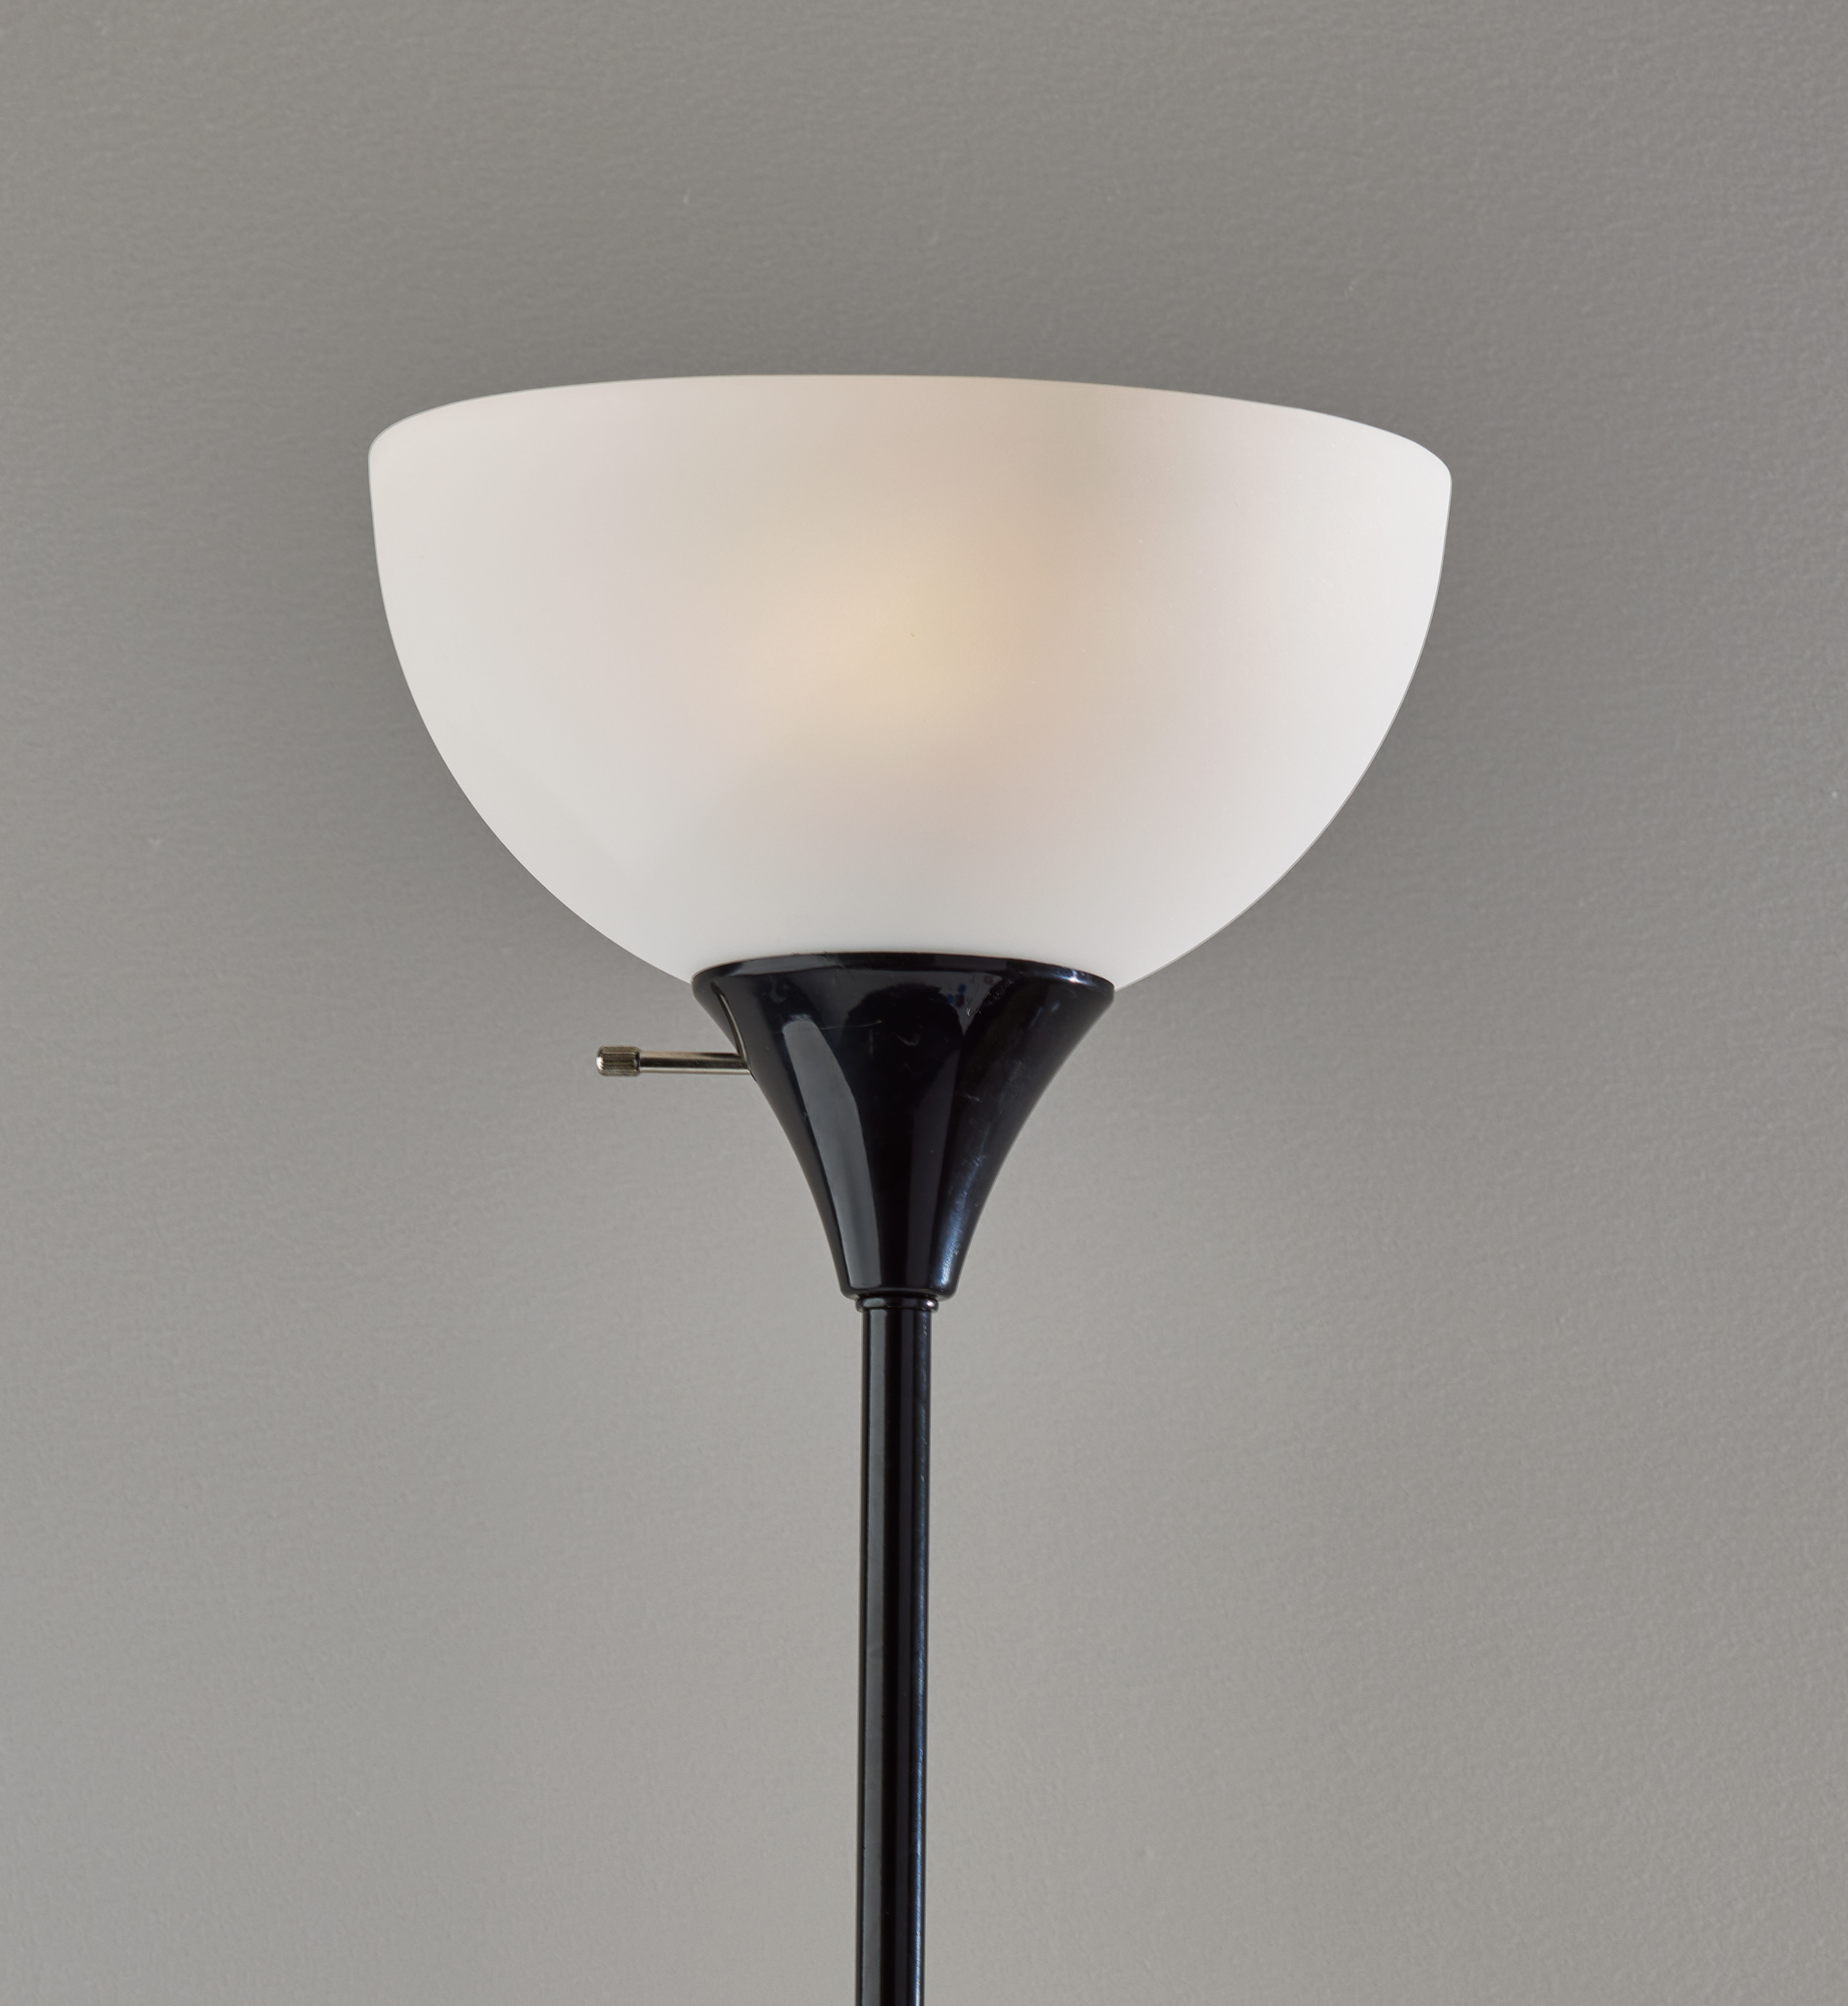 Mainstays 71" Floor Lamp, Black, Plastic, Modern, Perfect for Home and Office Use - image 3 of 9